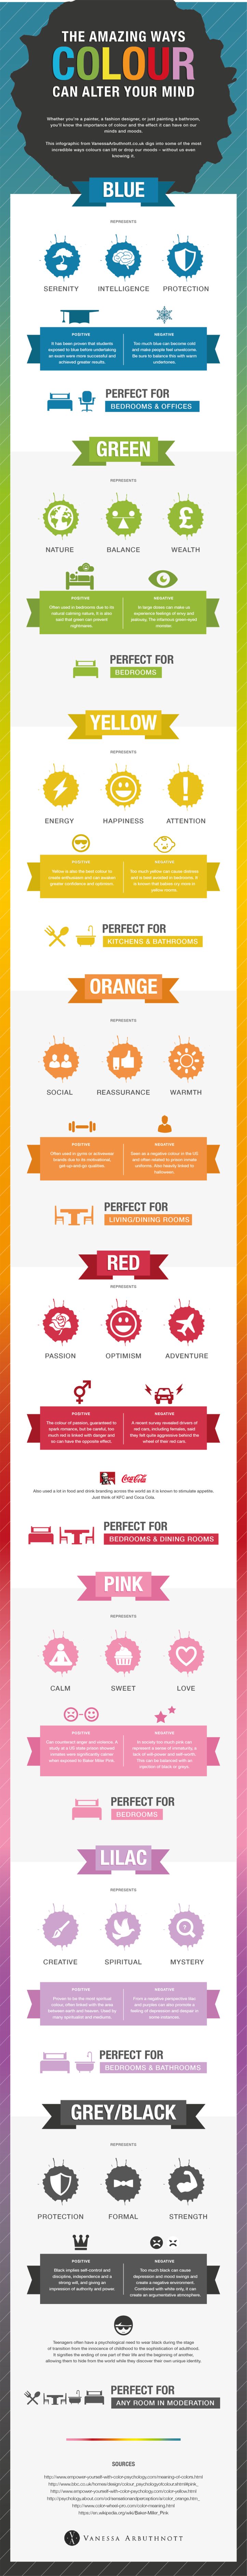 The Amazing Ways Colour Can Alter Your Mind #Infographic